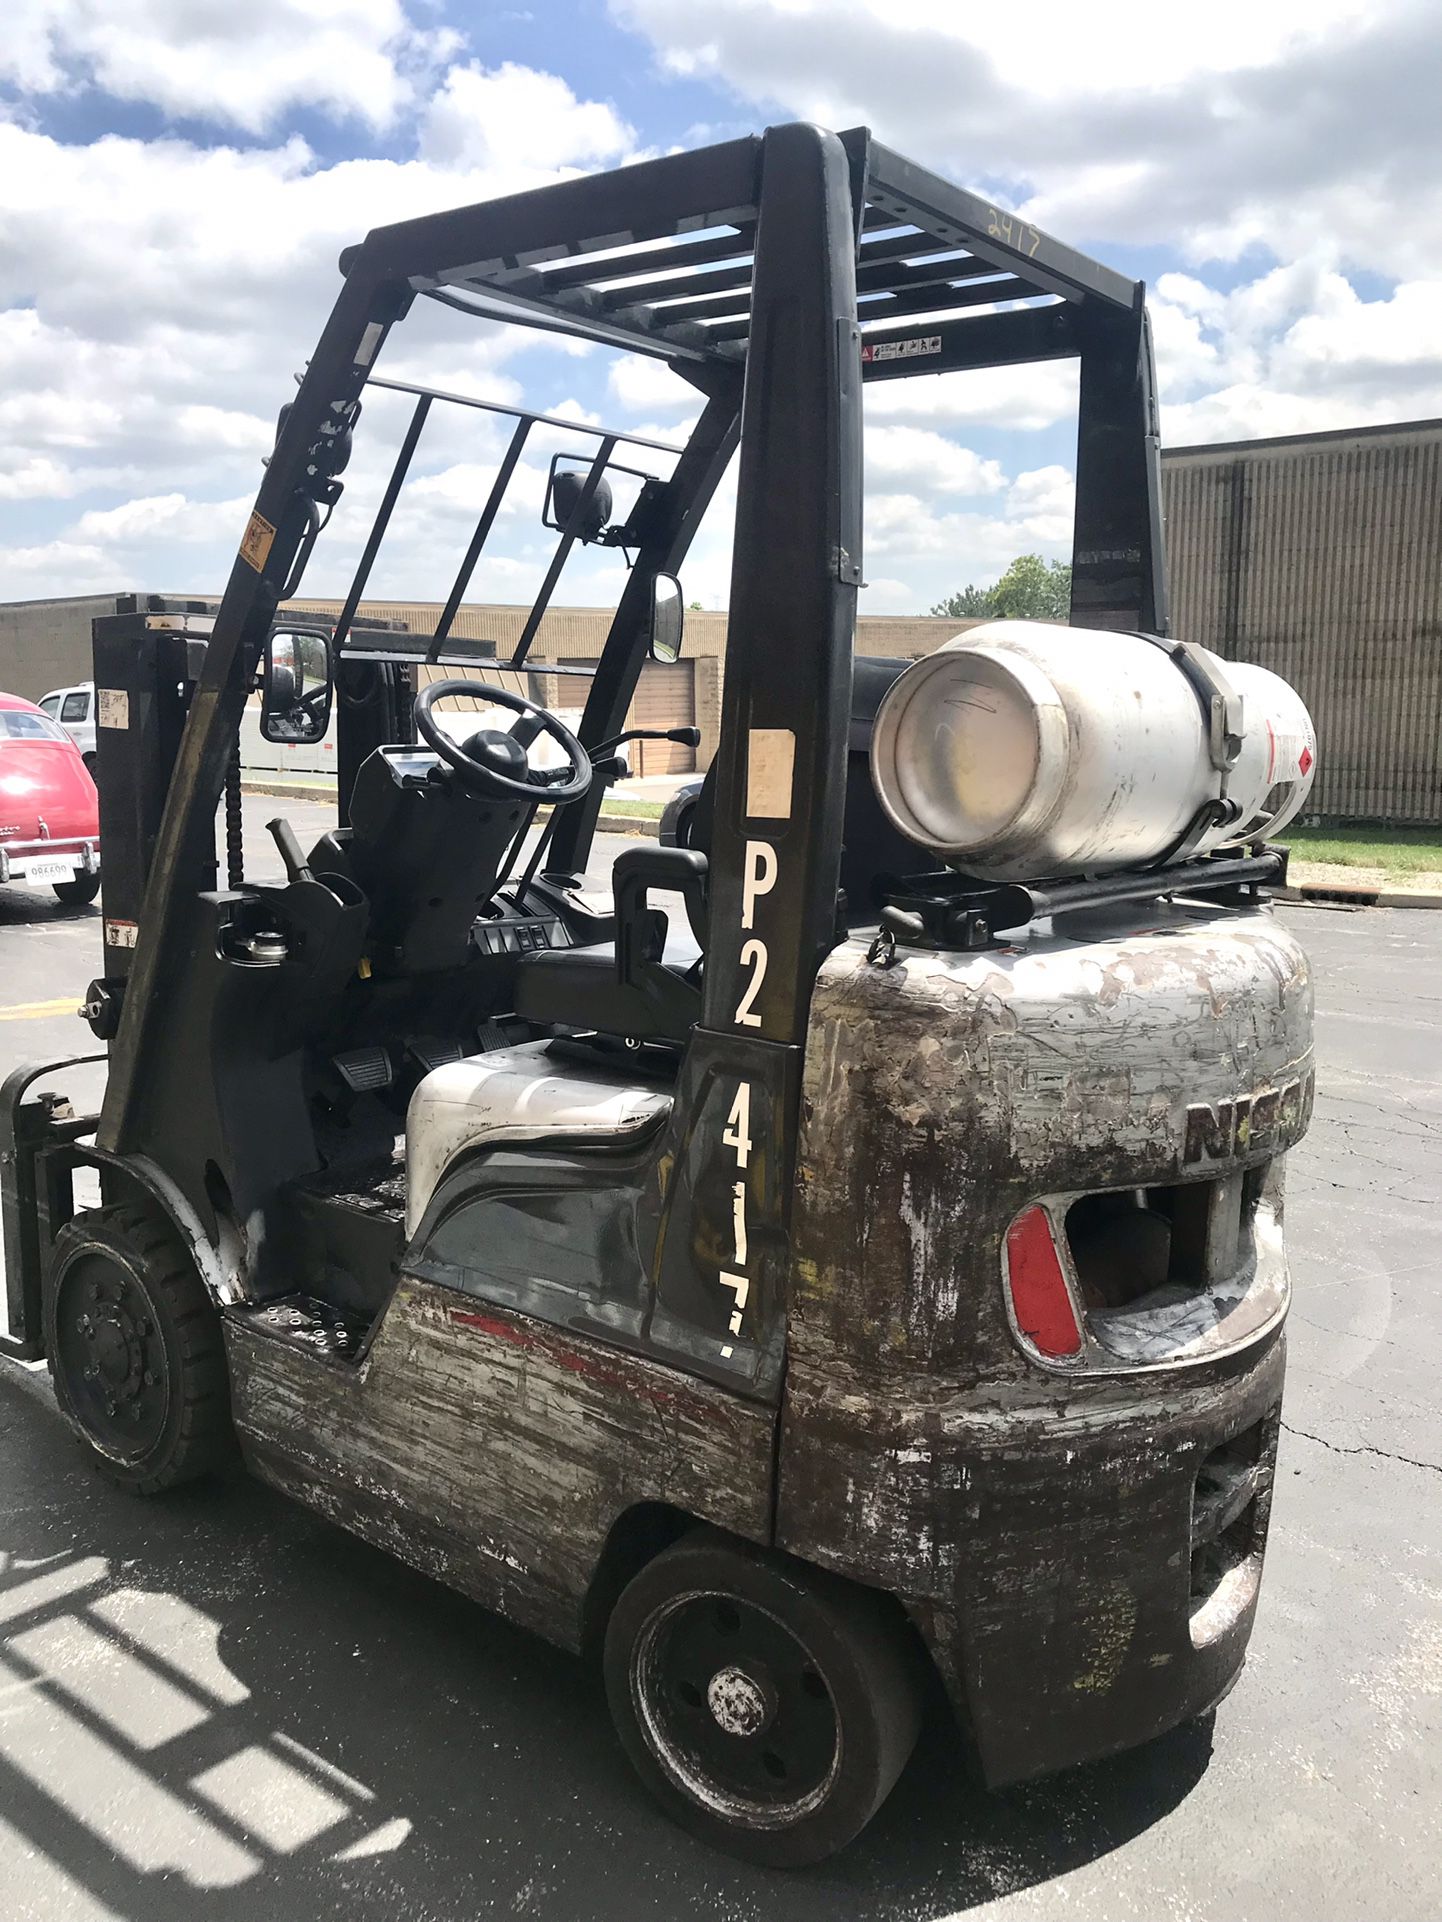 2014 Nissan Forklift In Perfectly Working Condition. Double Stage. Side Shift. Propane. No Leaks, No Issues.